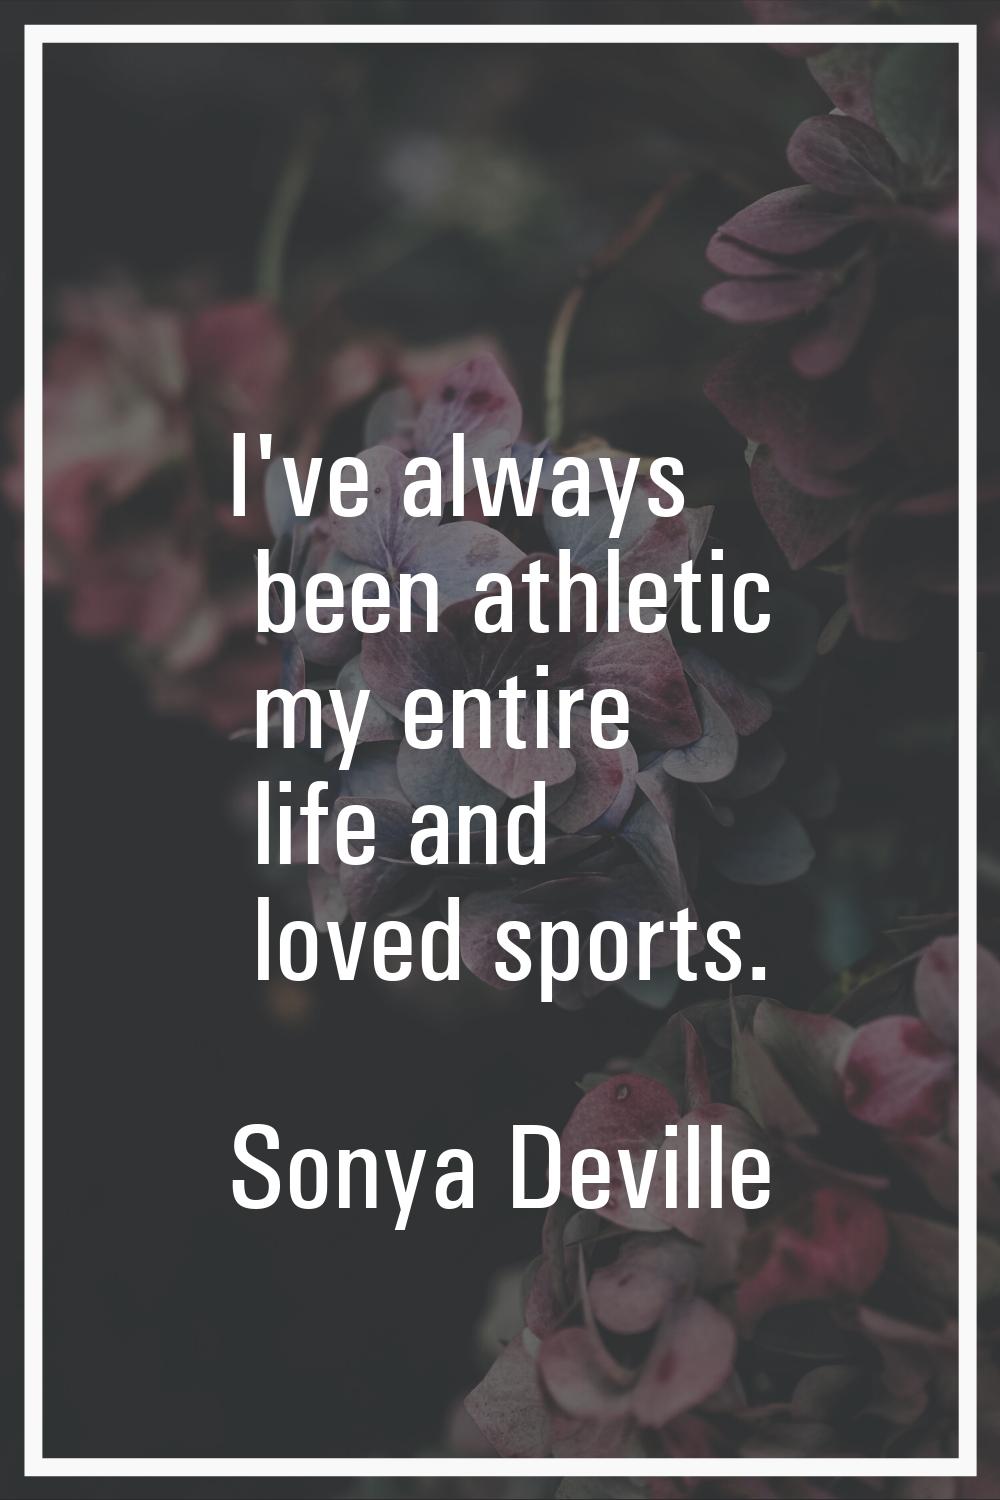 I've always been athletic my entire life and loved sports.